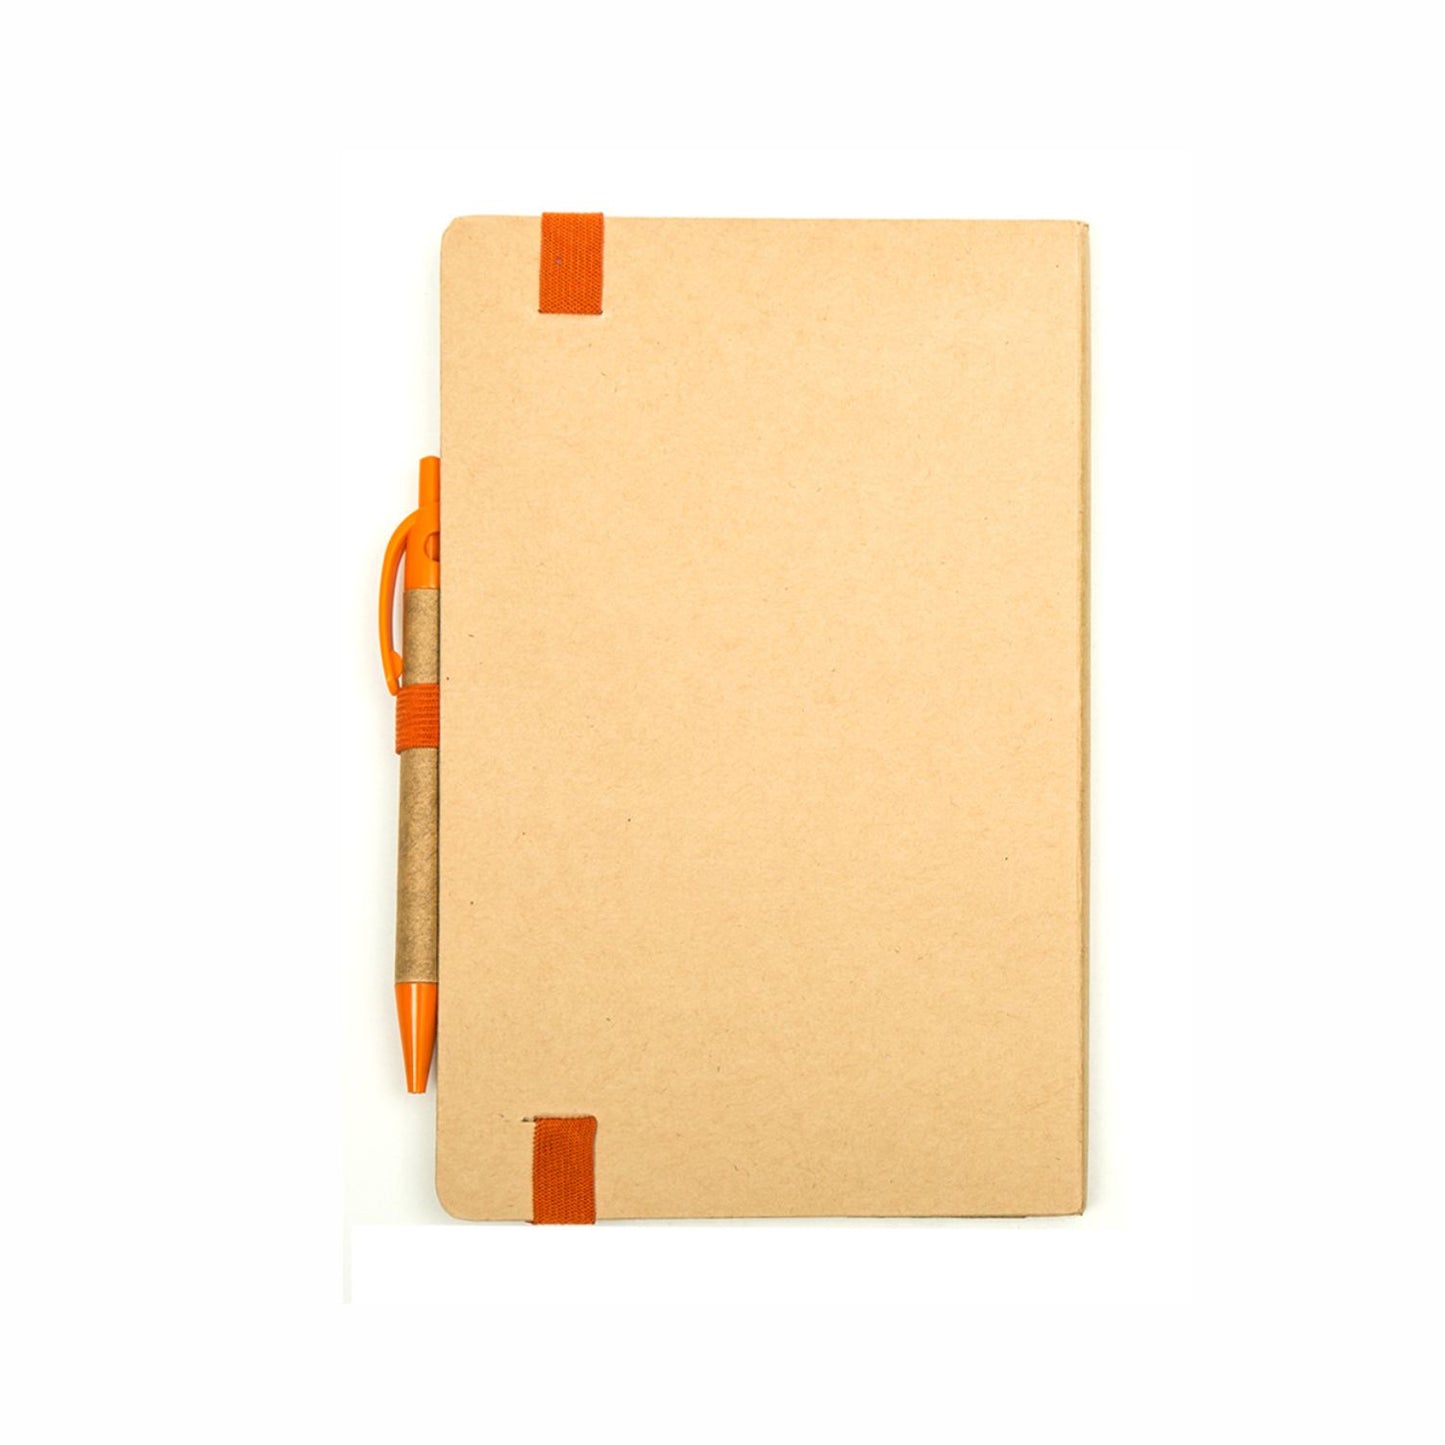 Eco A5 Journal Notebook